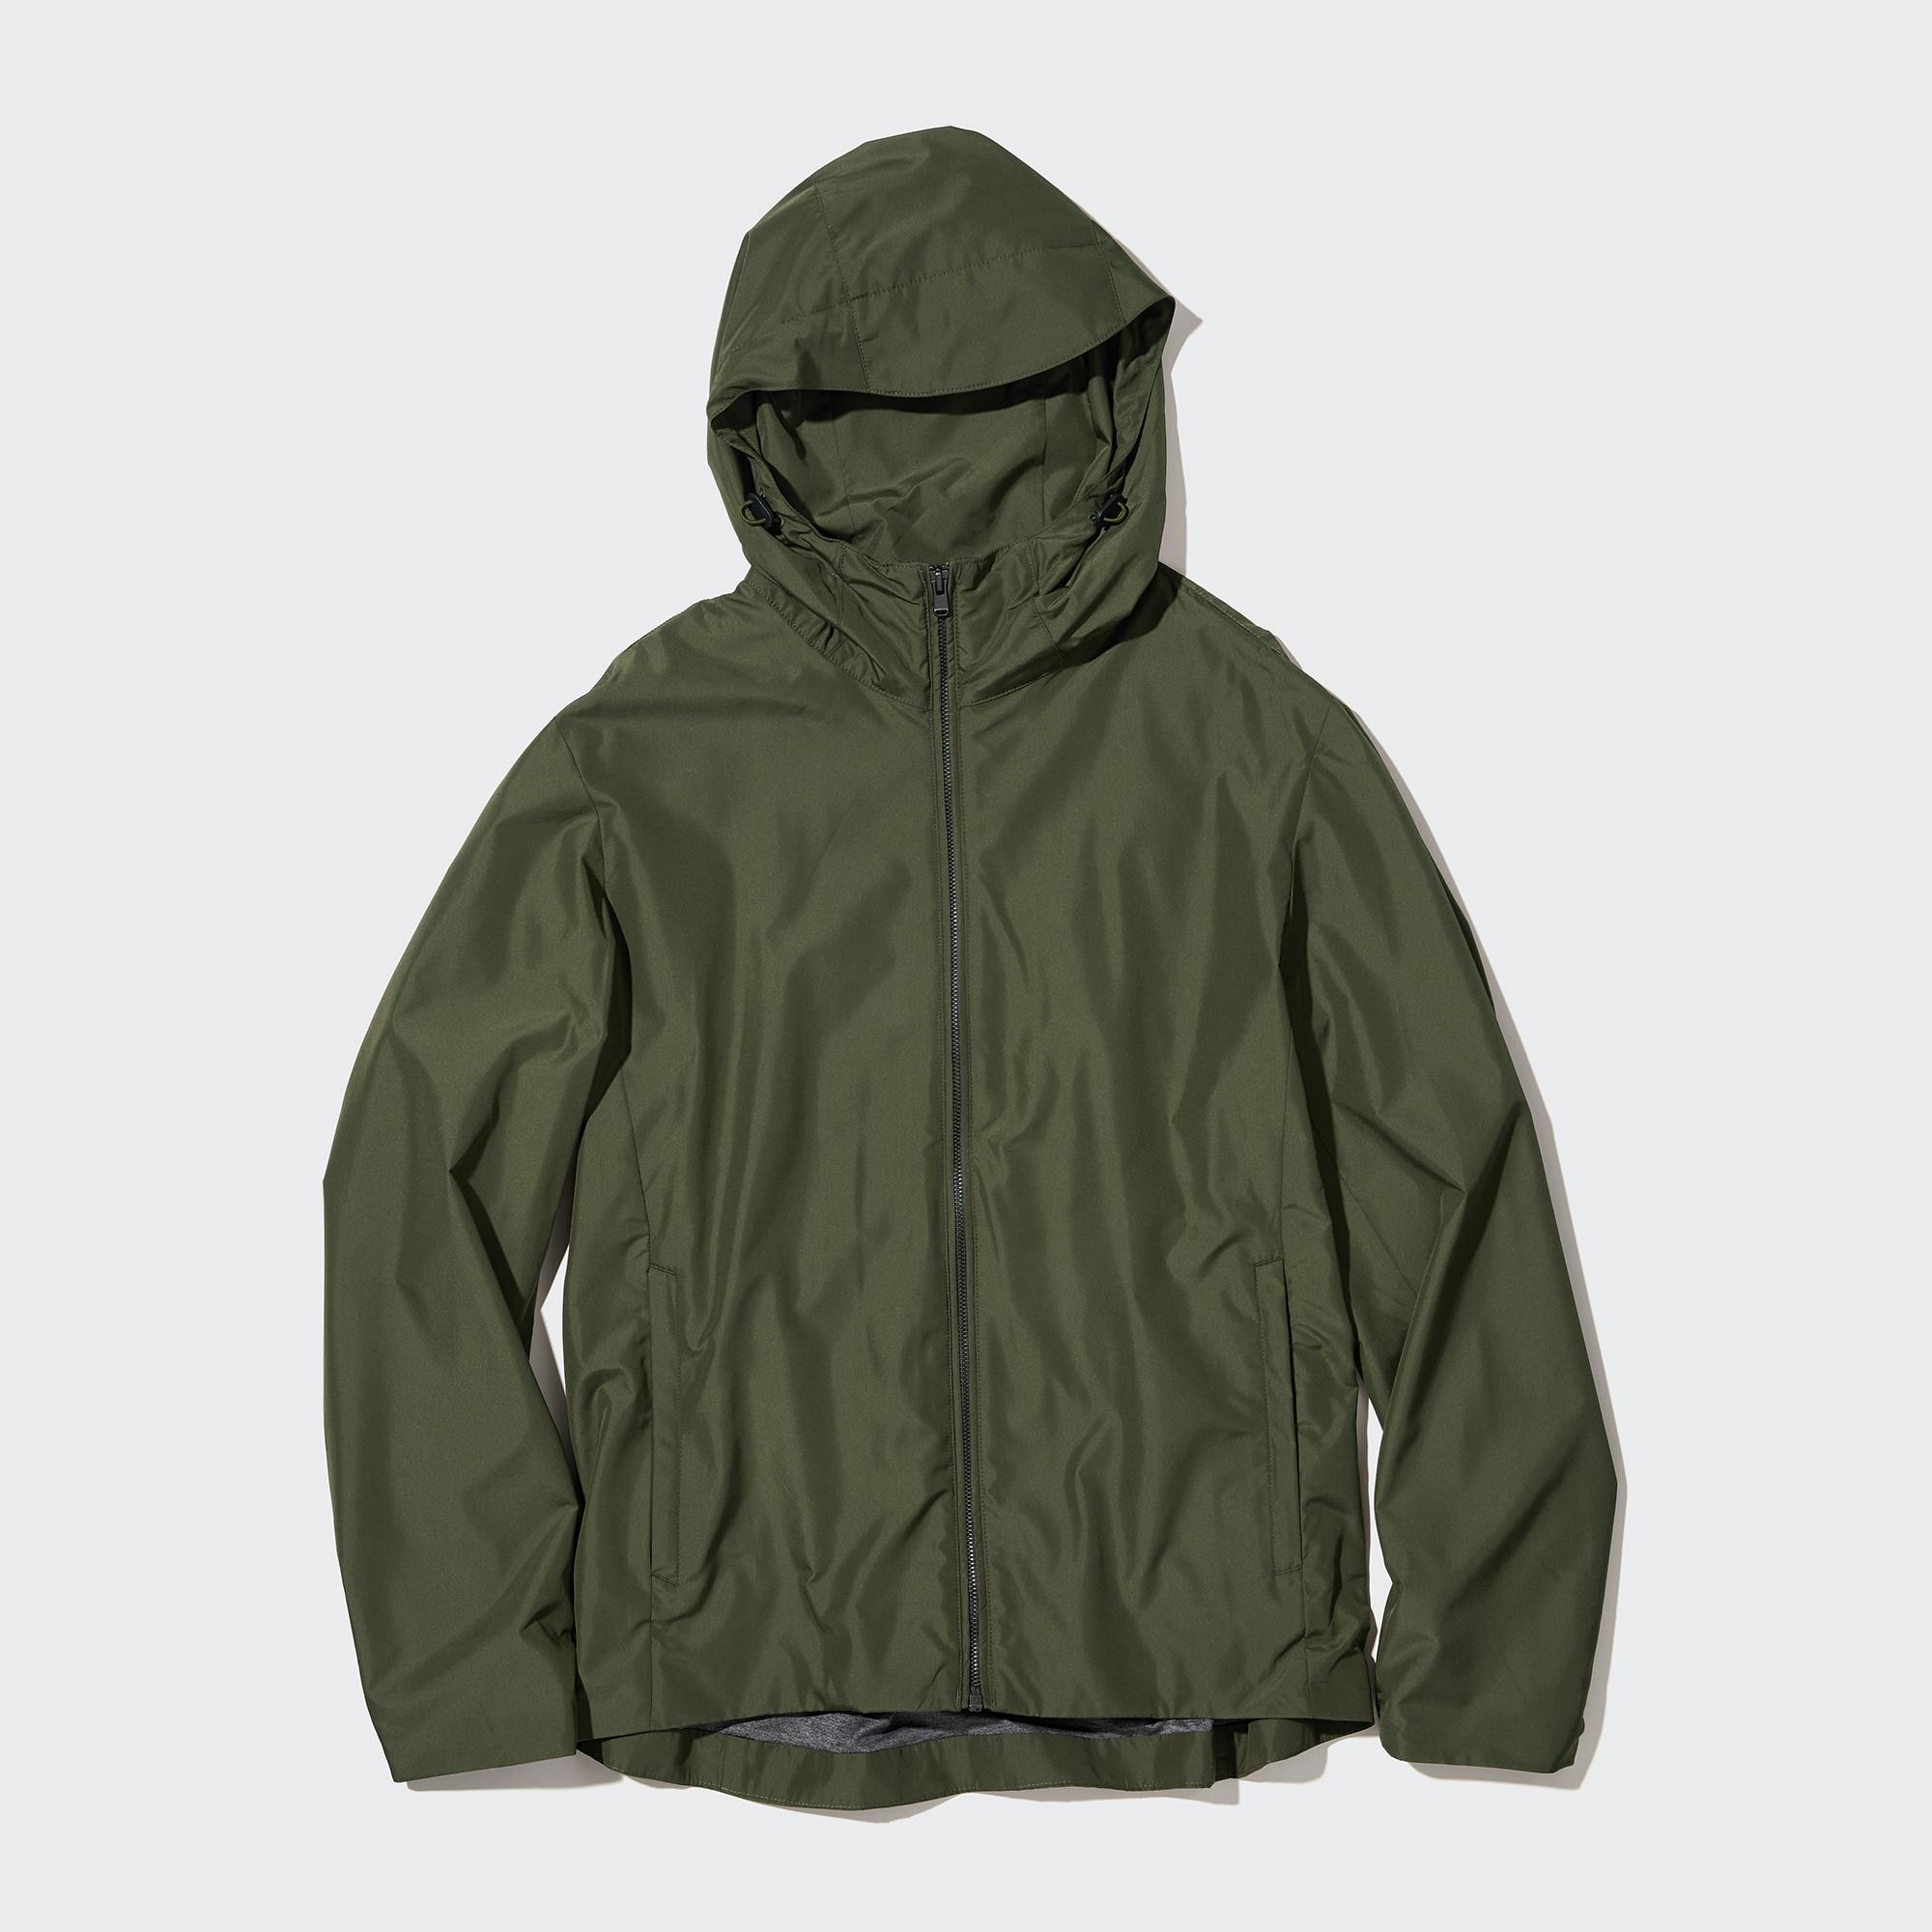 Smooth Jersey Lined Parka